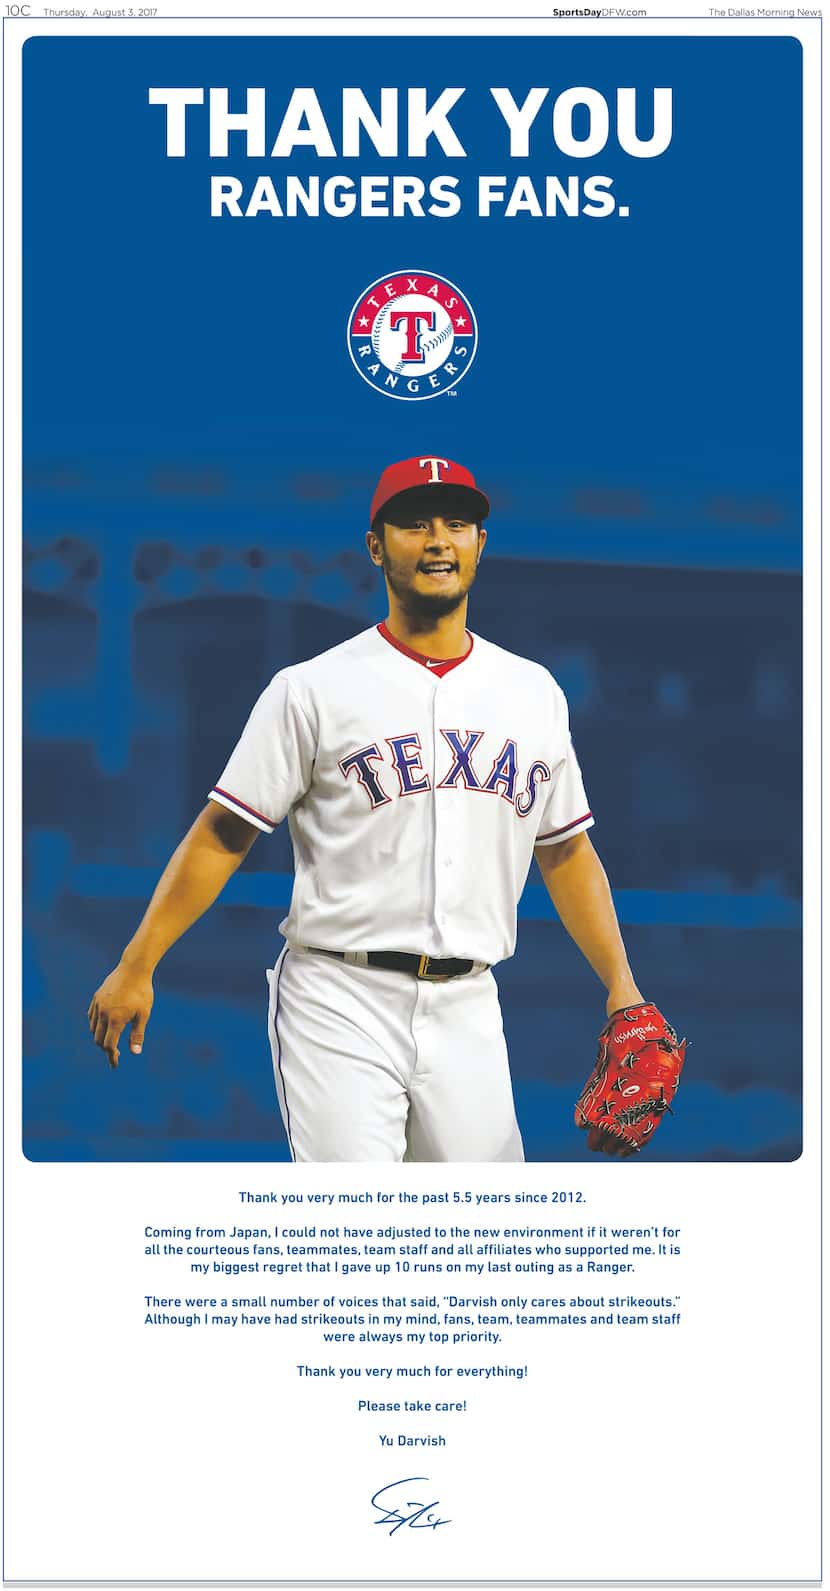 Yu Darvish ad in the Thursday Aug. 3 edition of The Dallas Morning News